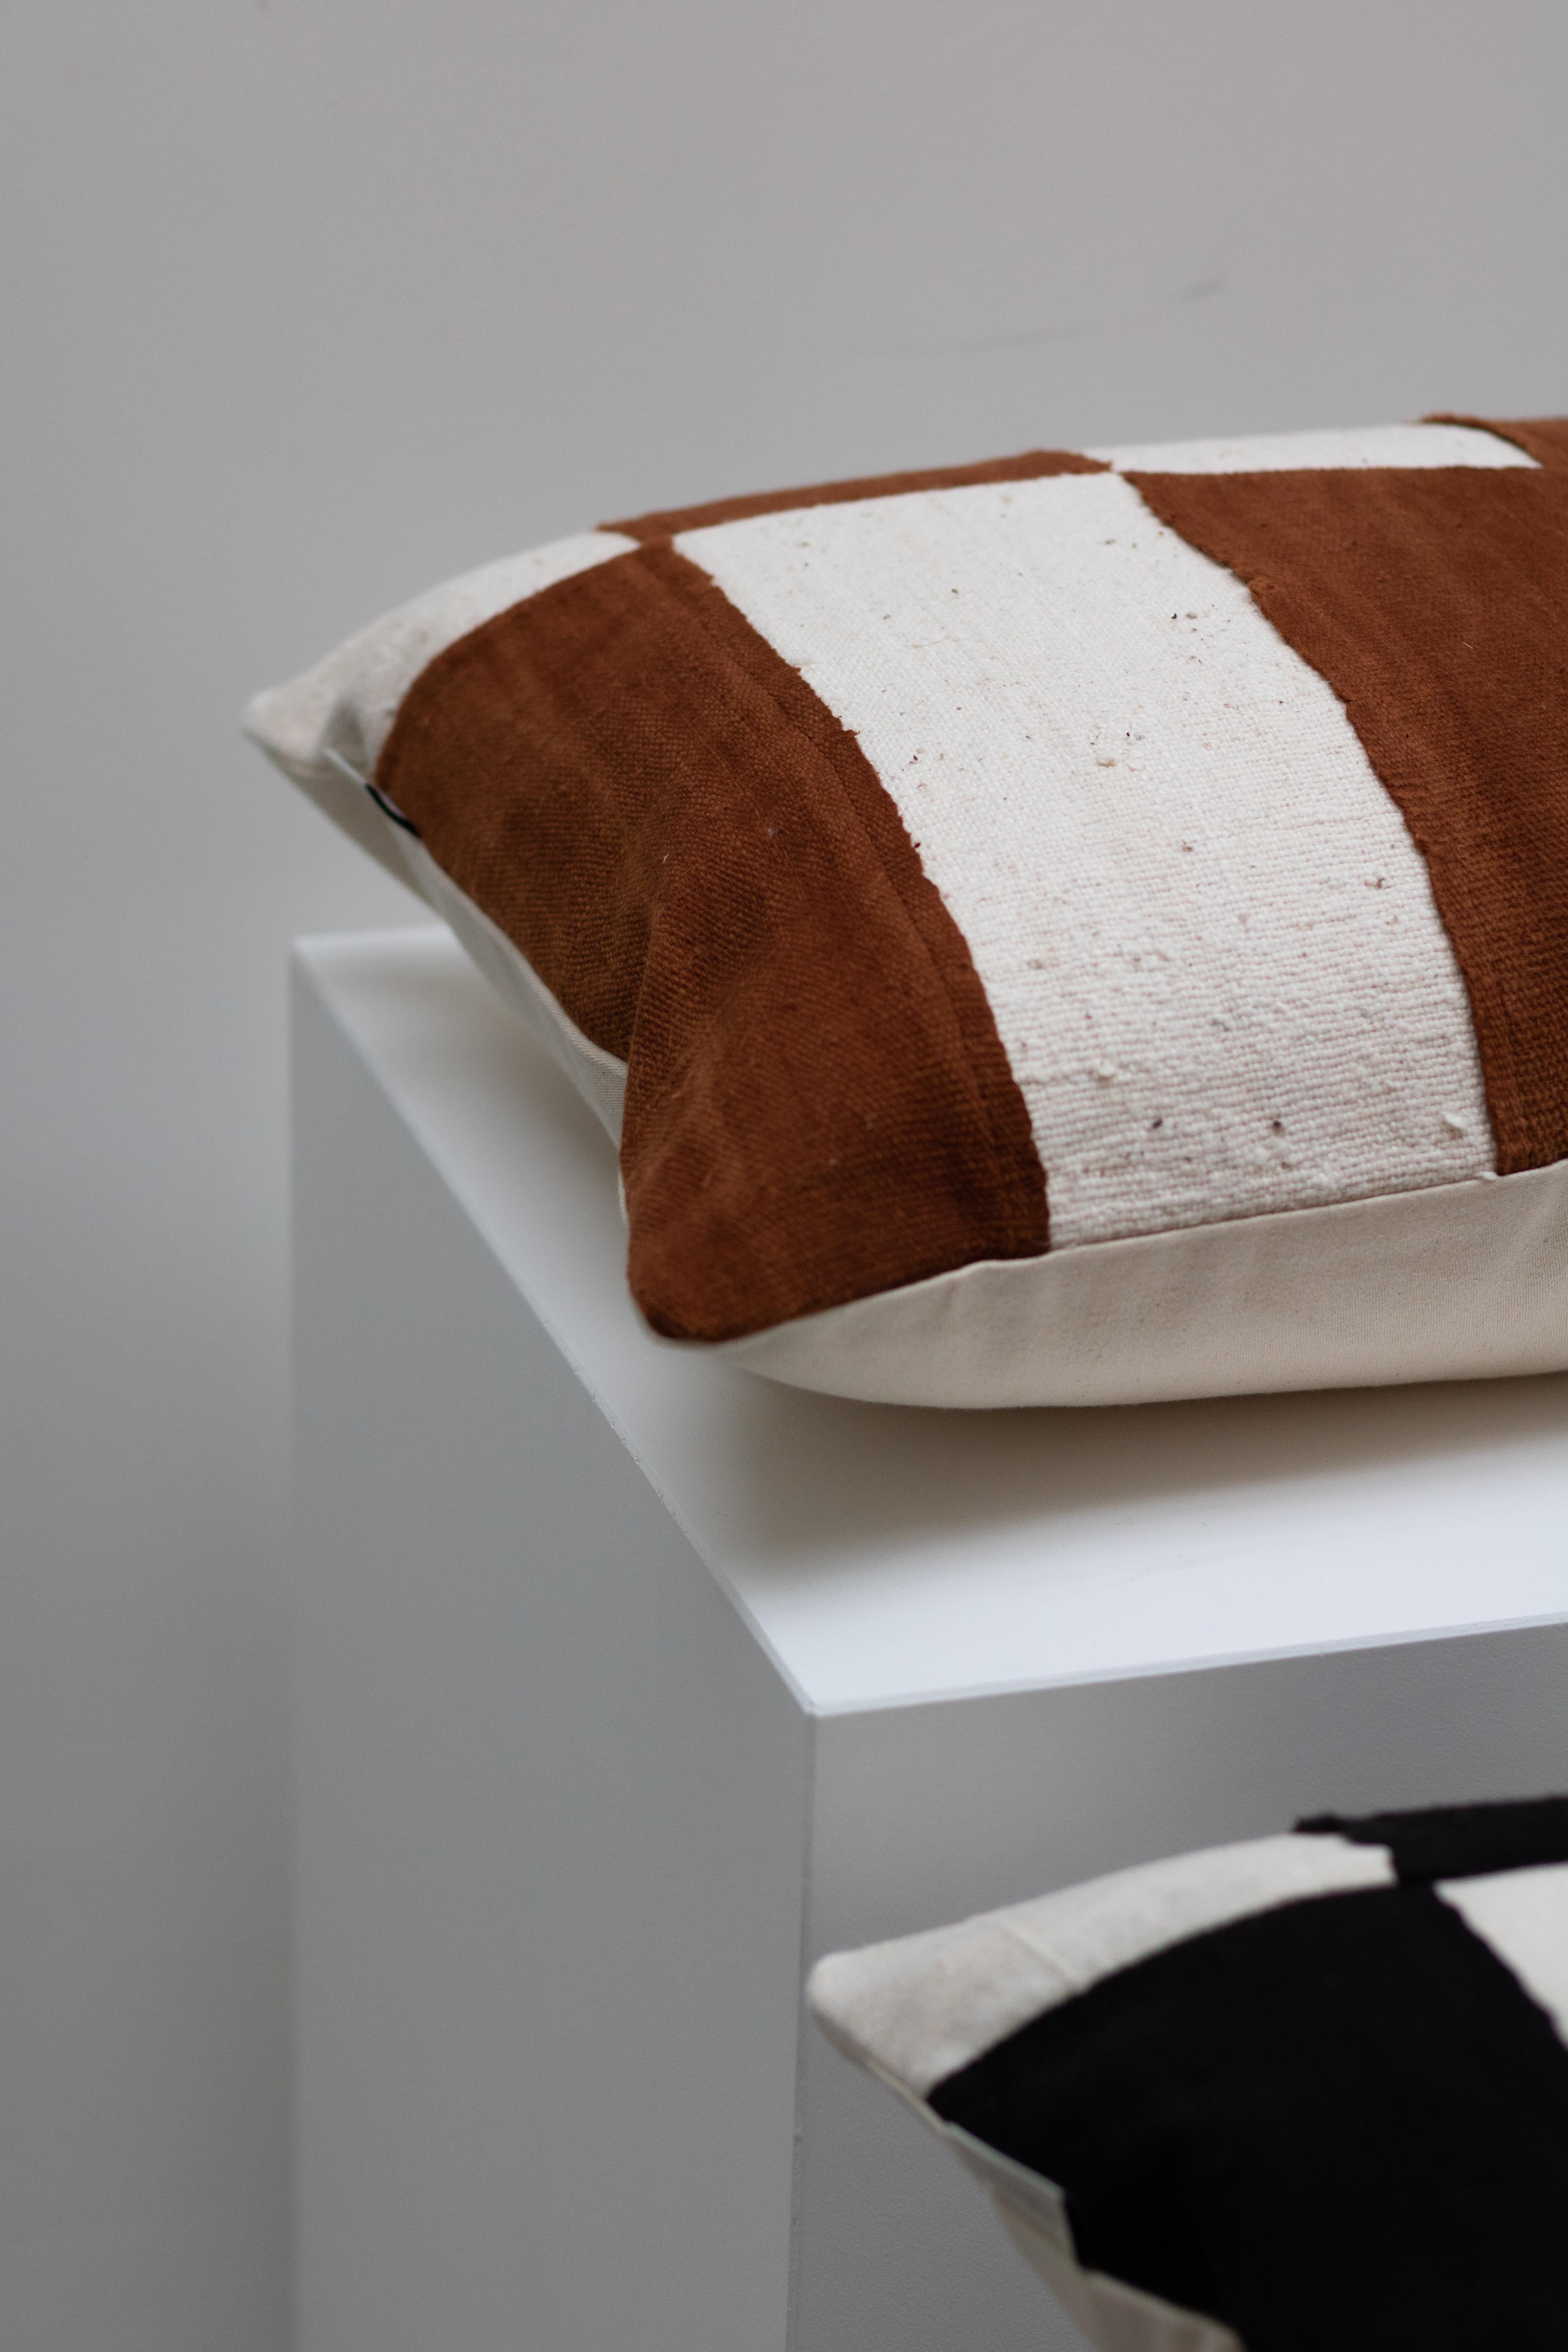 Woven Contemporary Brown & White Cushion Cover from Handwoven Malian Cotton Fabrics For Sale